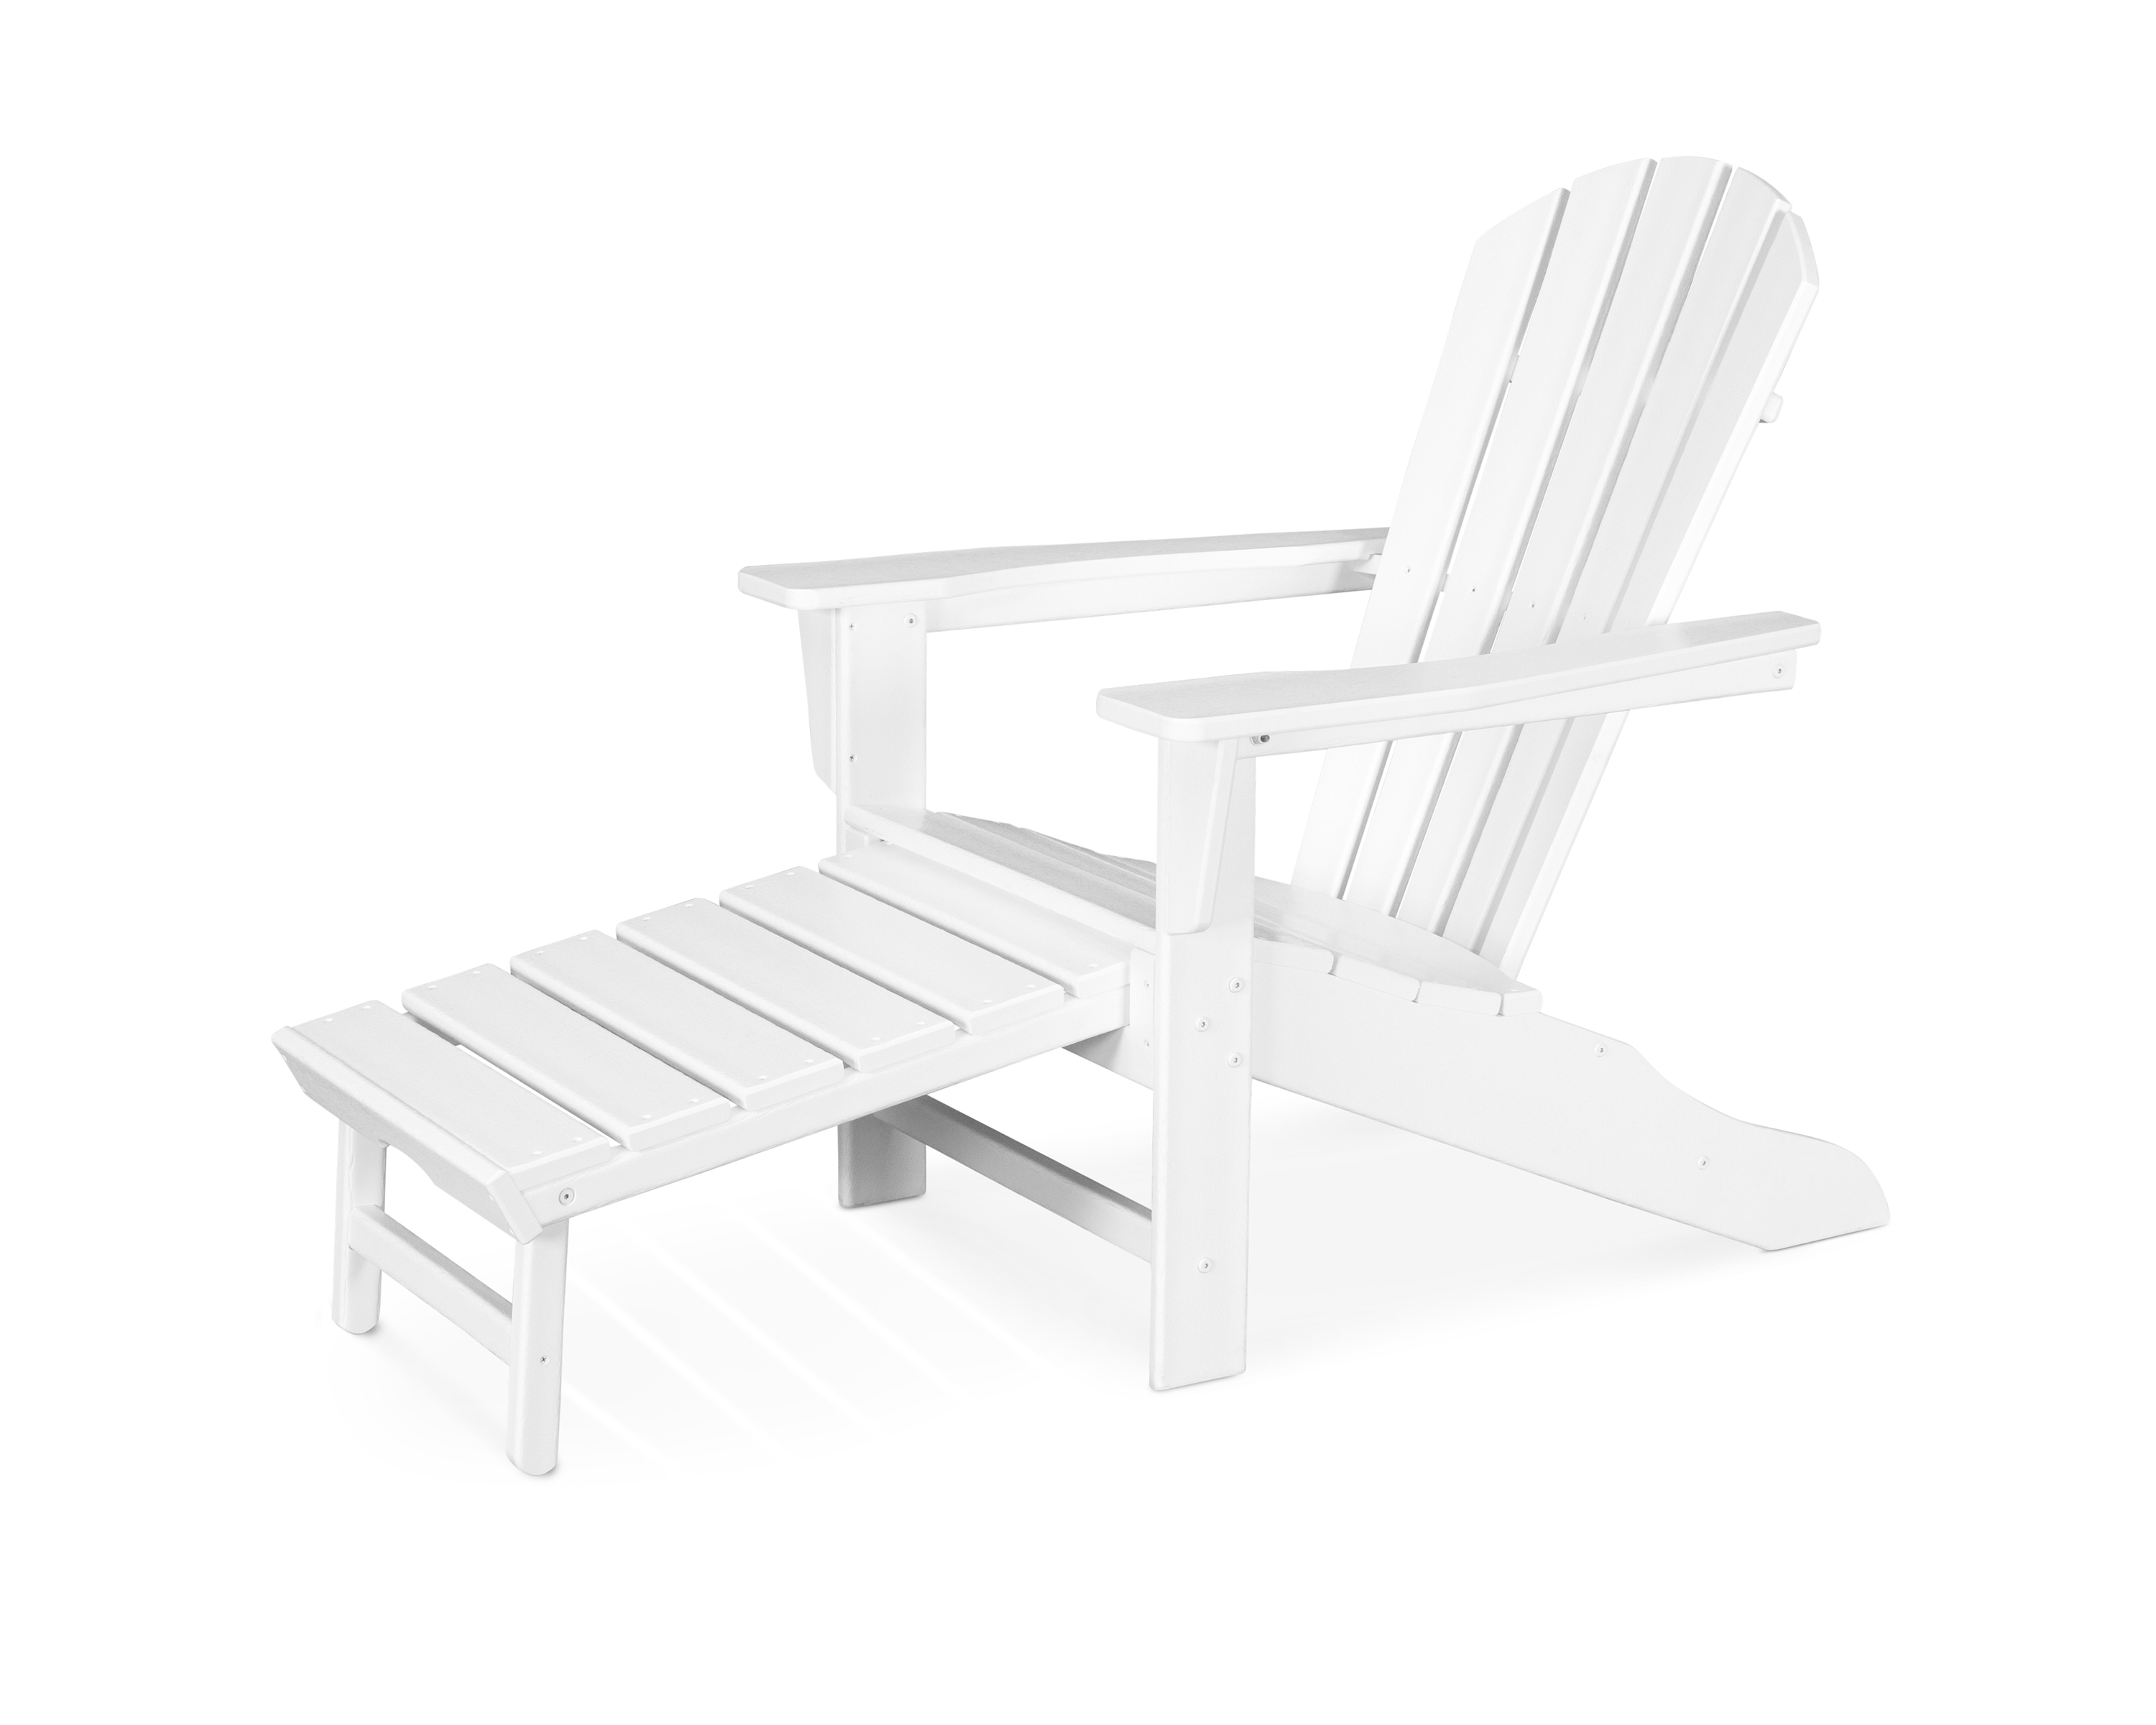 palm coast ultimate adirondack with hideaway ottoman in white thumbnail image